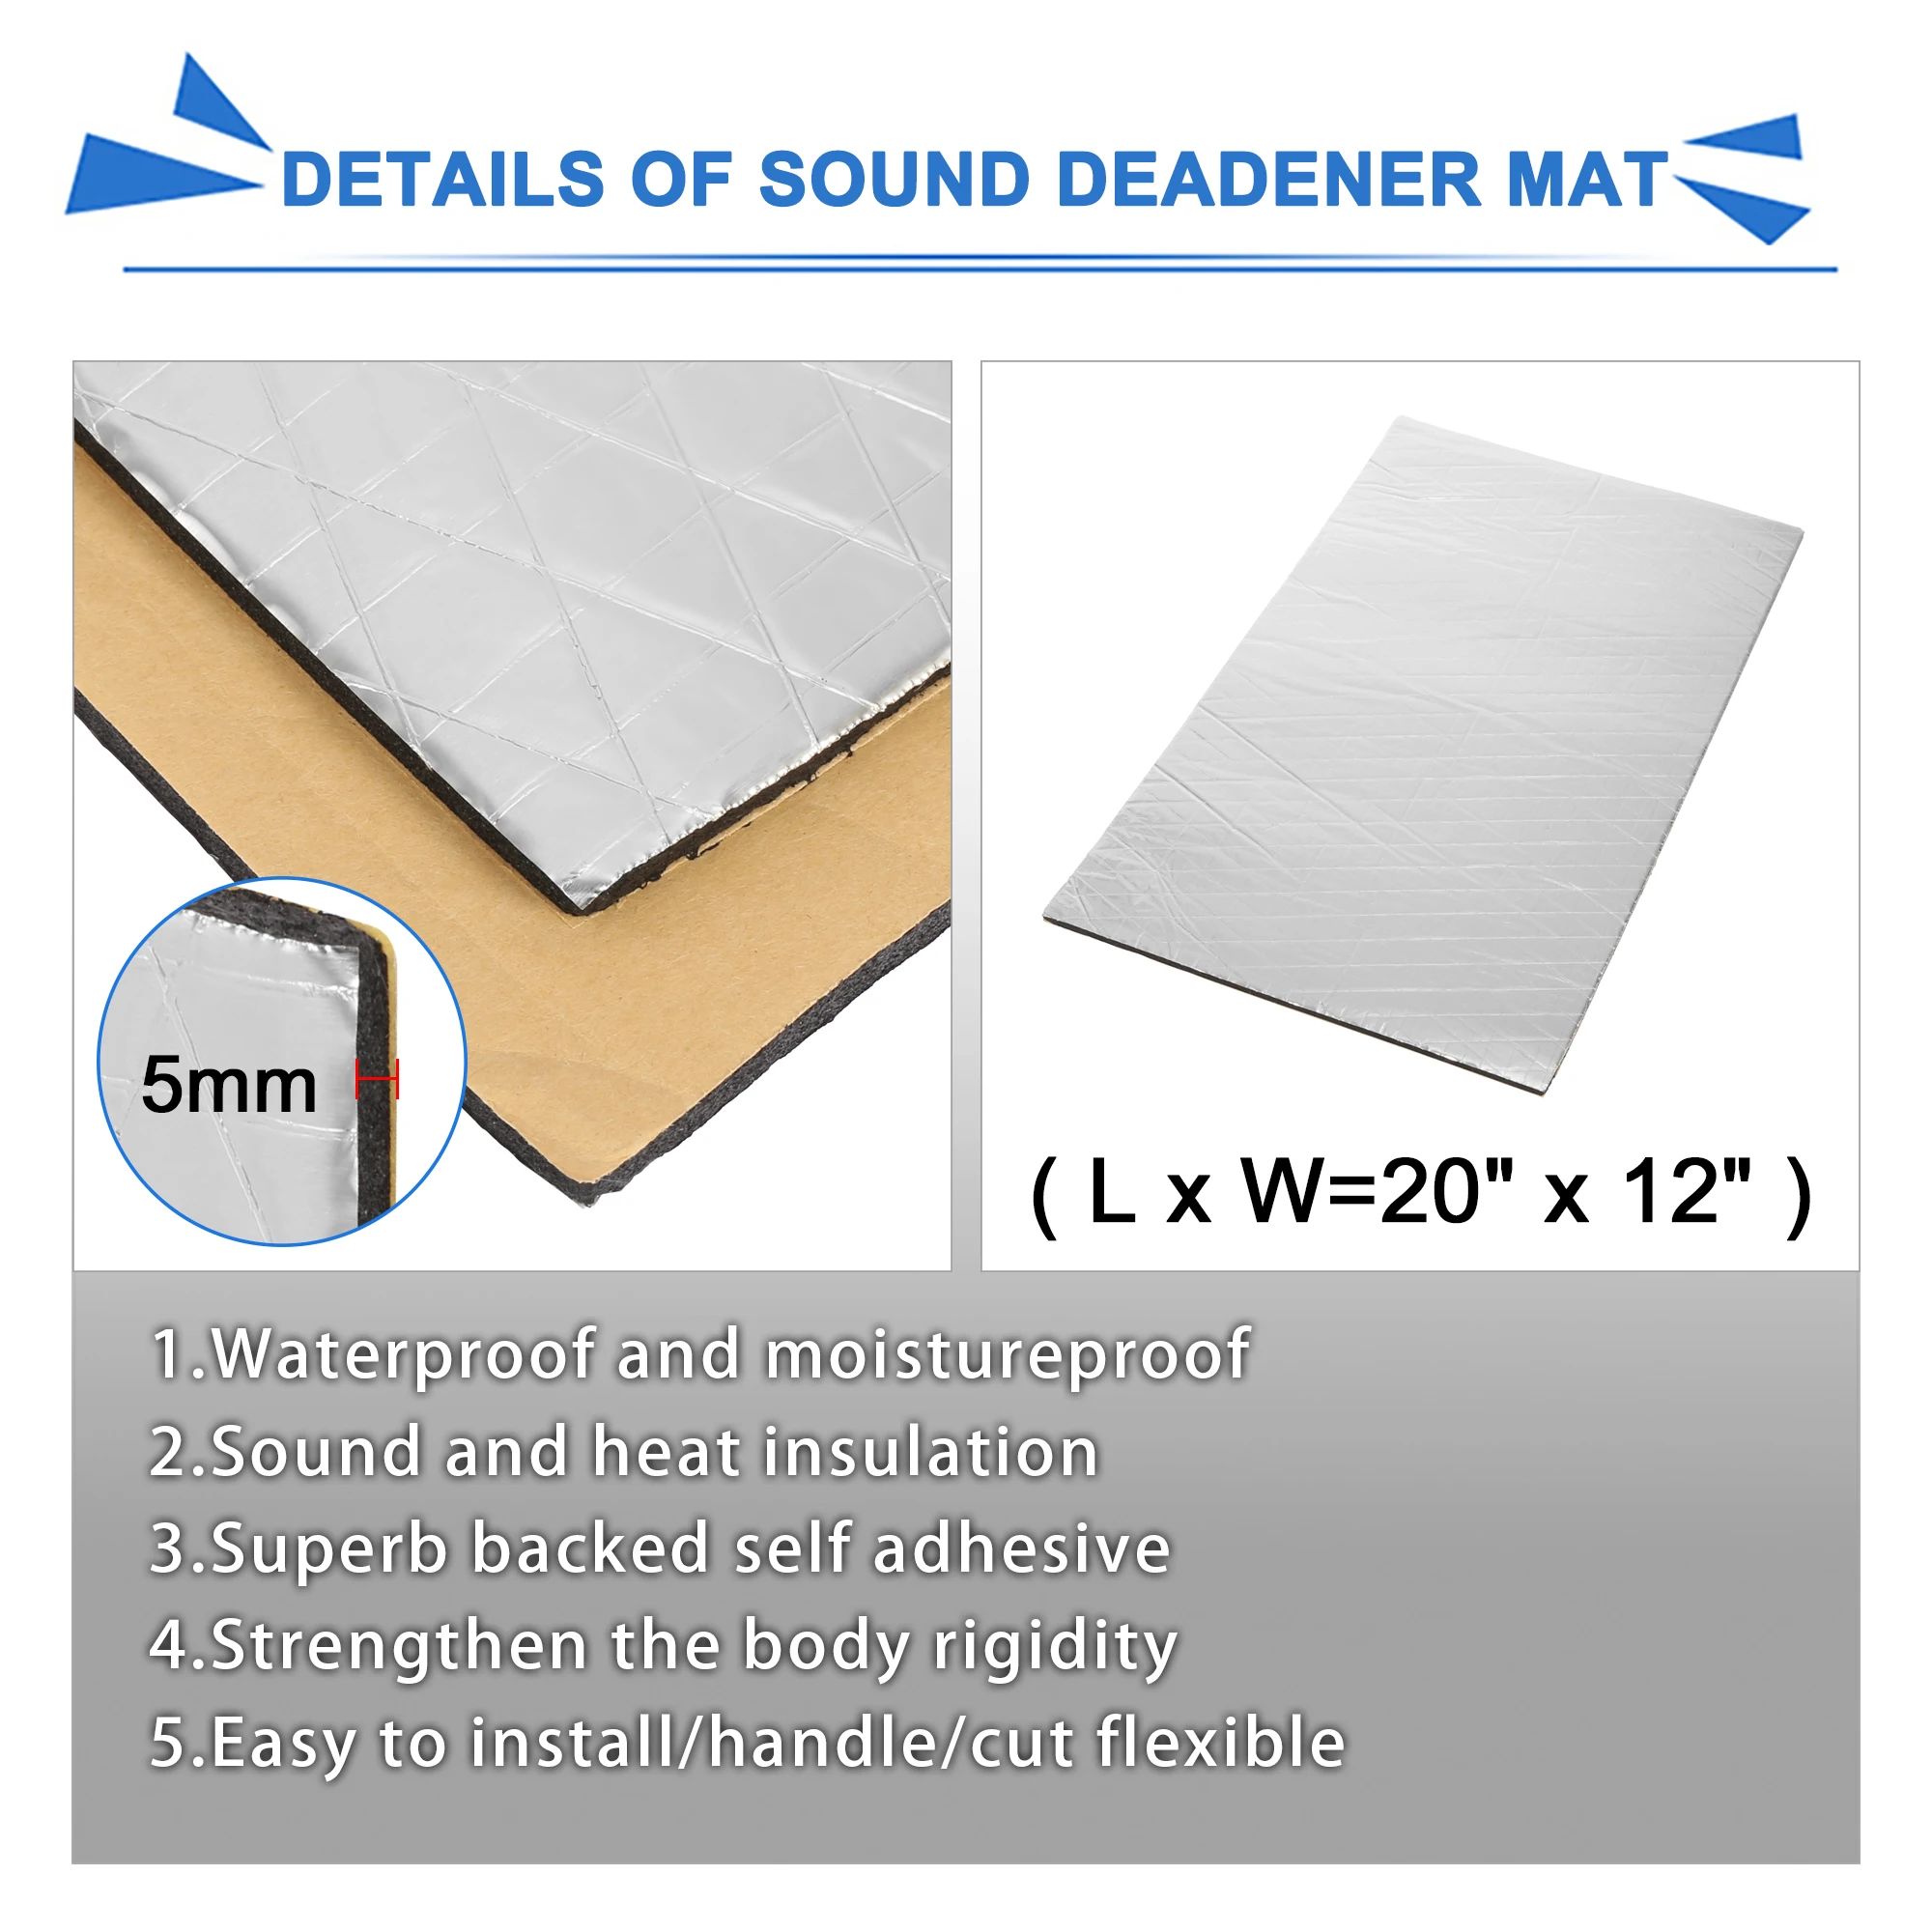 Uxcell 12pcs 50x30cm Car Sound Insulation Mat 5mm Door Hood Engine Thermal Sound  Deadening Sheet With Free Gift Roller Push Tool - AliExpress